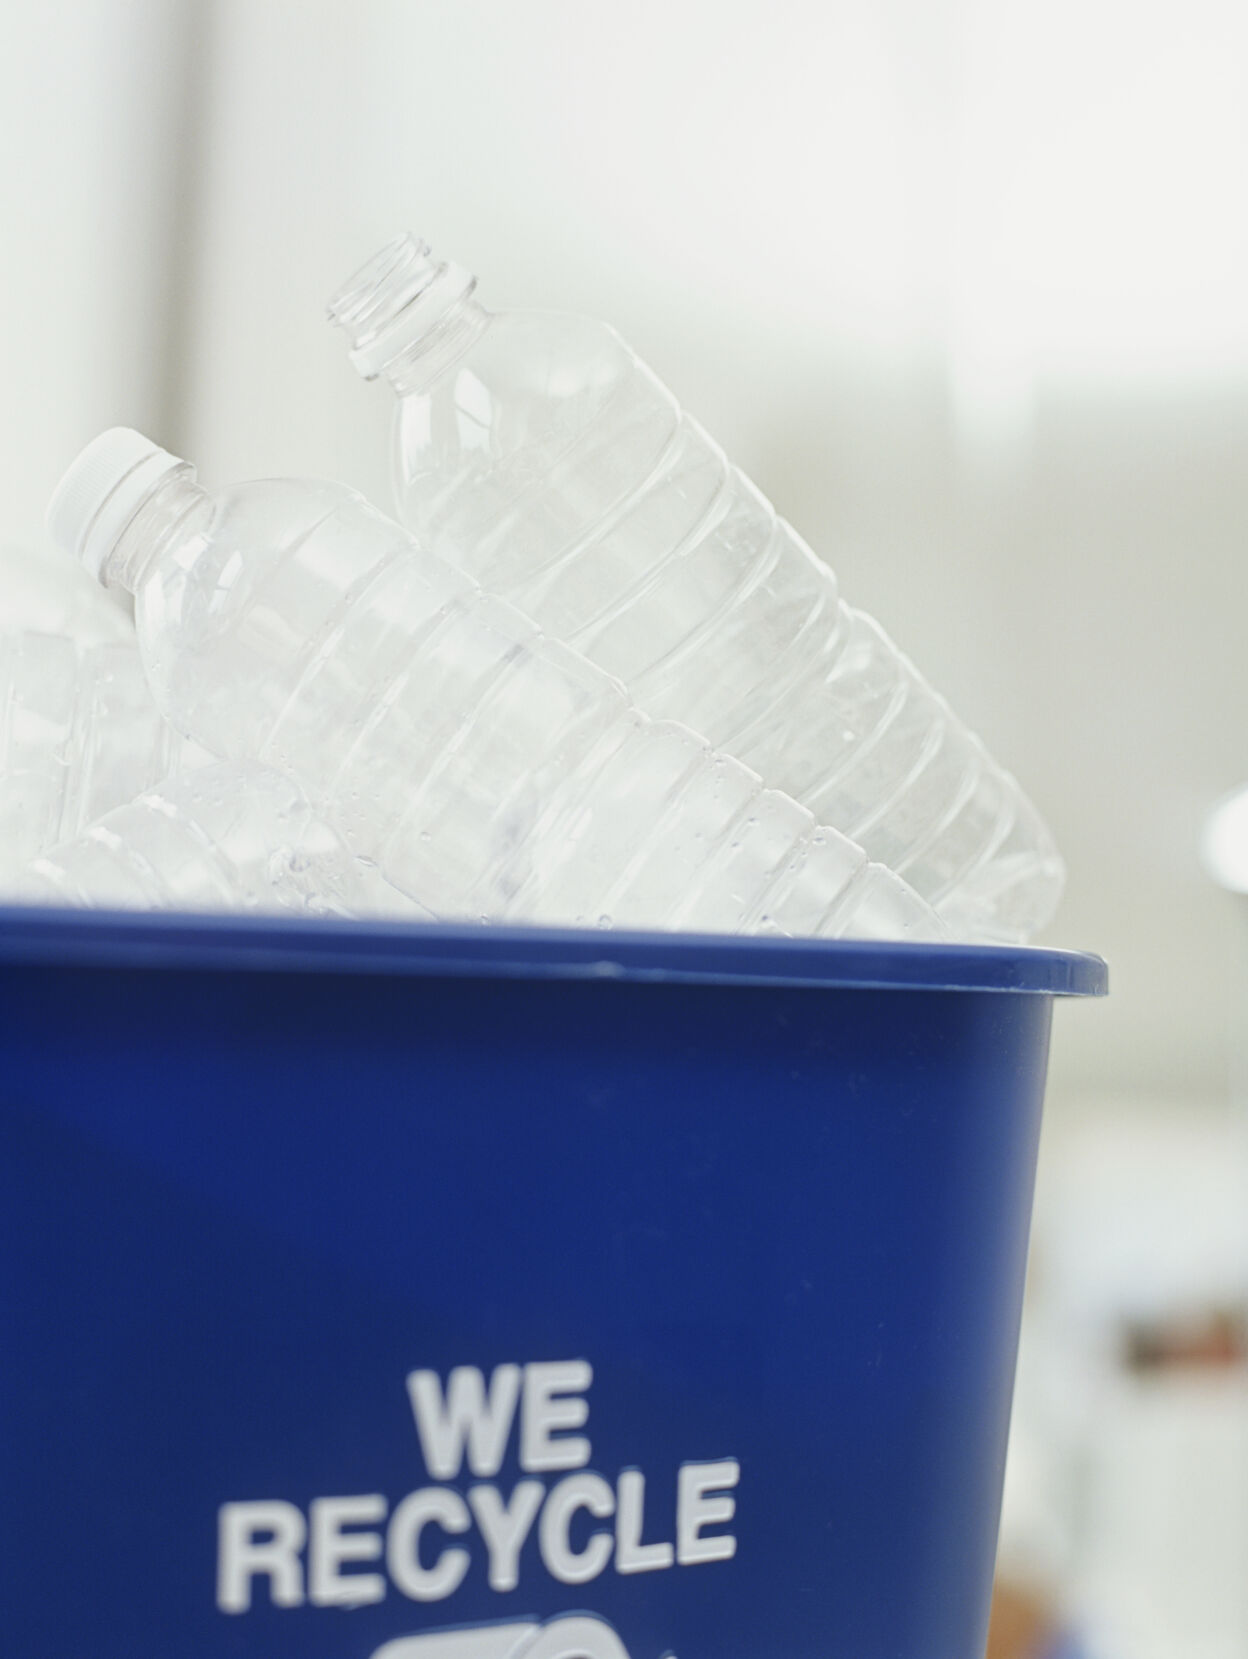 Plastic bottles in recycling bin,close-up    PHOTO CREDIT: Metro Creative